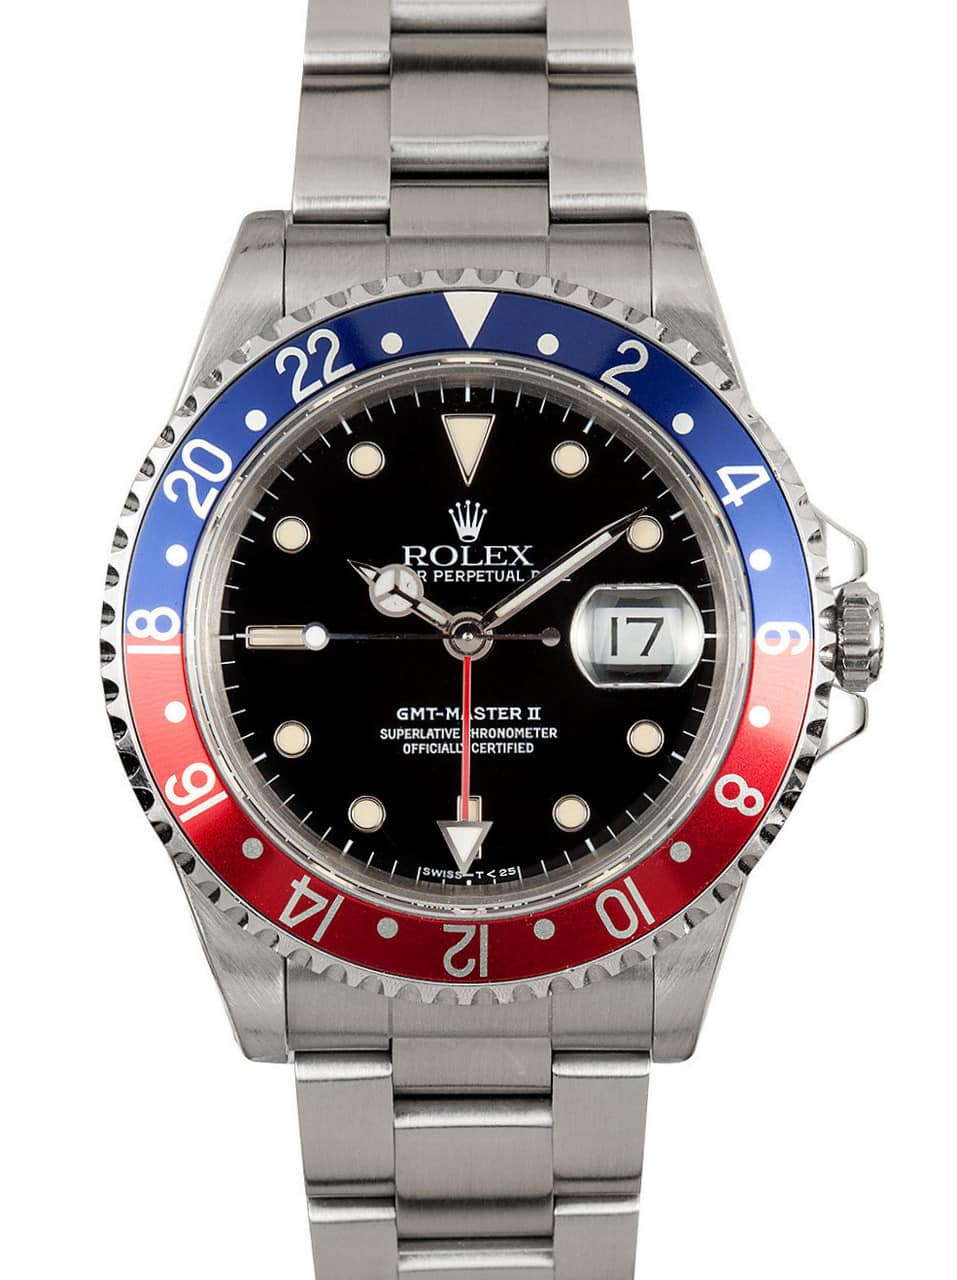 Formen blok alliance Rolex GMT Master II Pepsi Dial Stainless Steel 16710 Blue and Red Bezel